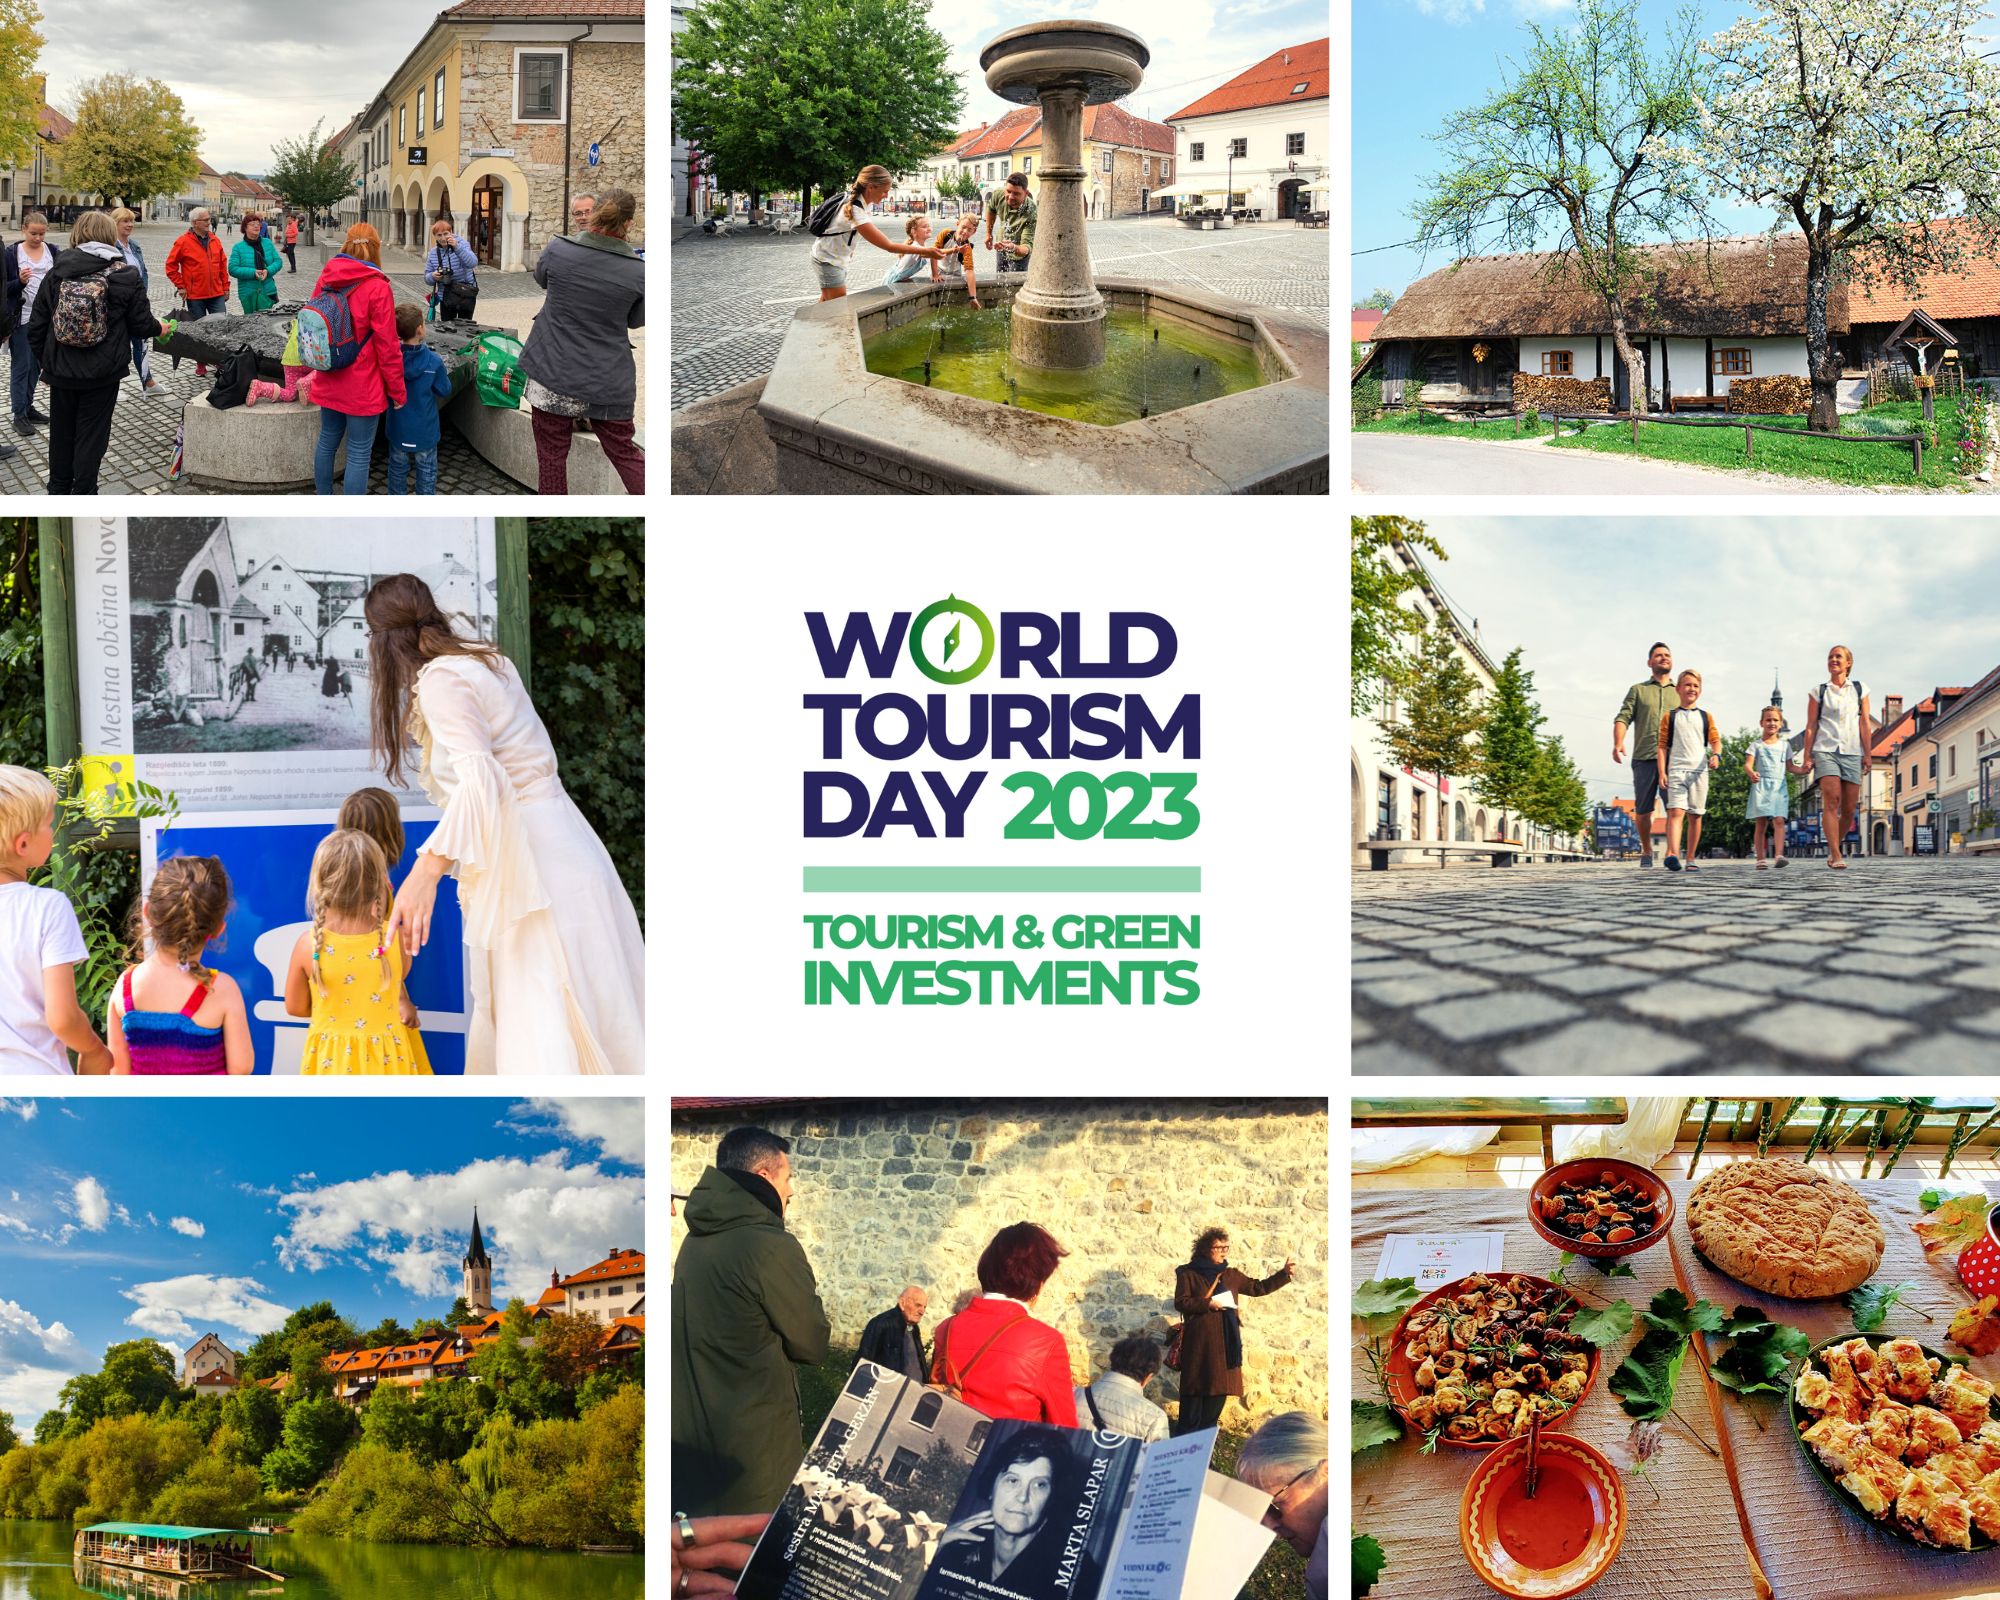 Free events for World Tourism Day 2023 in Novo mesto and surroundings: